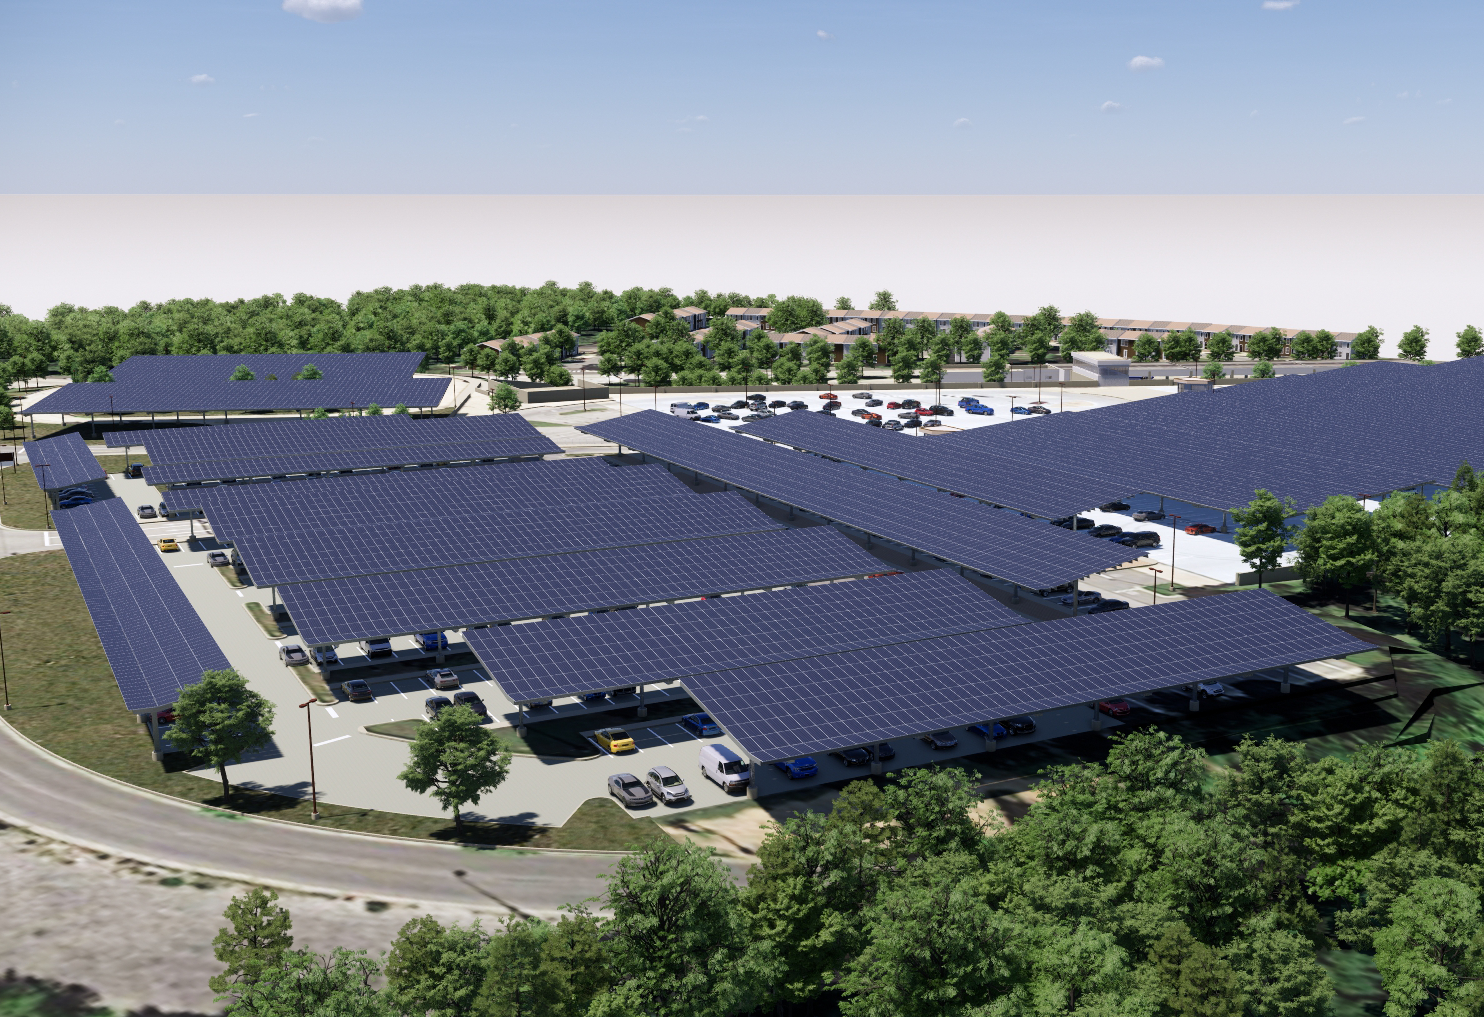 Southern Ave Station rendering courtesy of SunPower Corporation